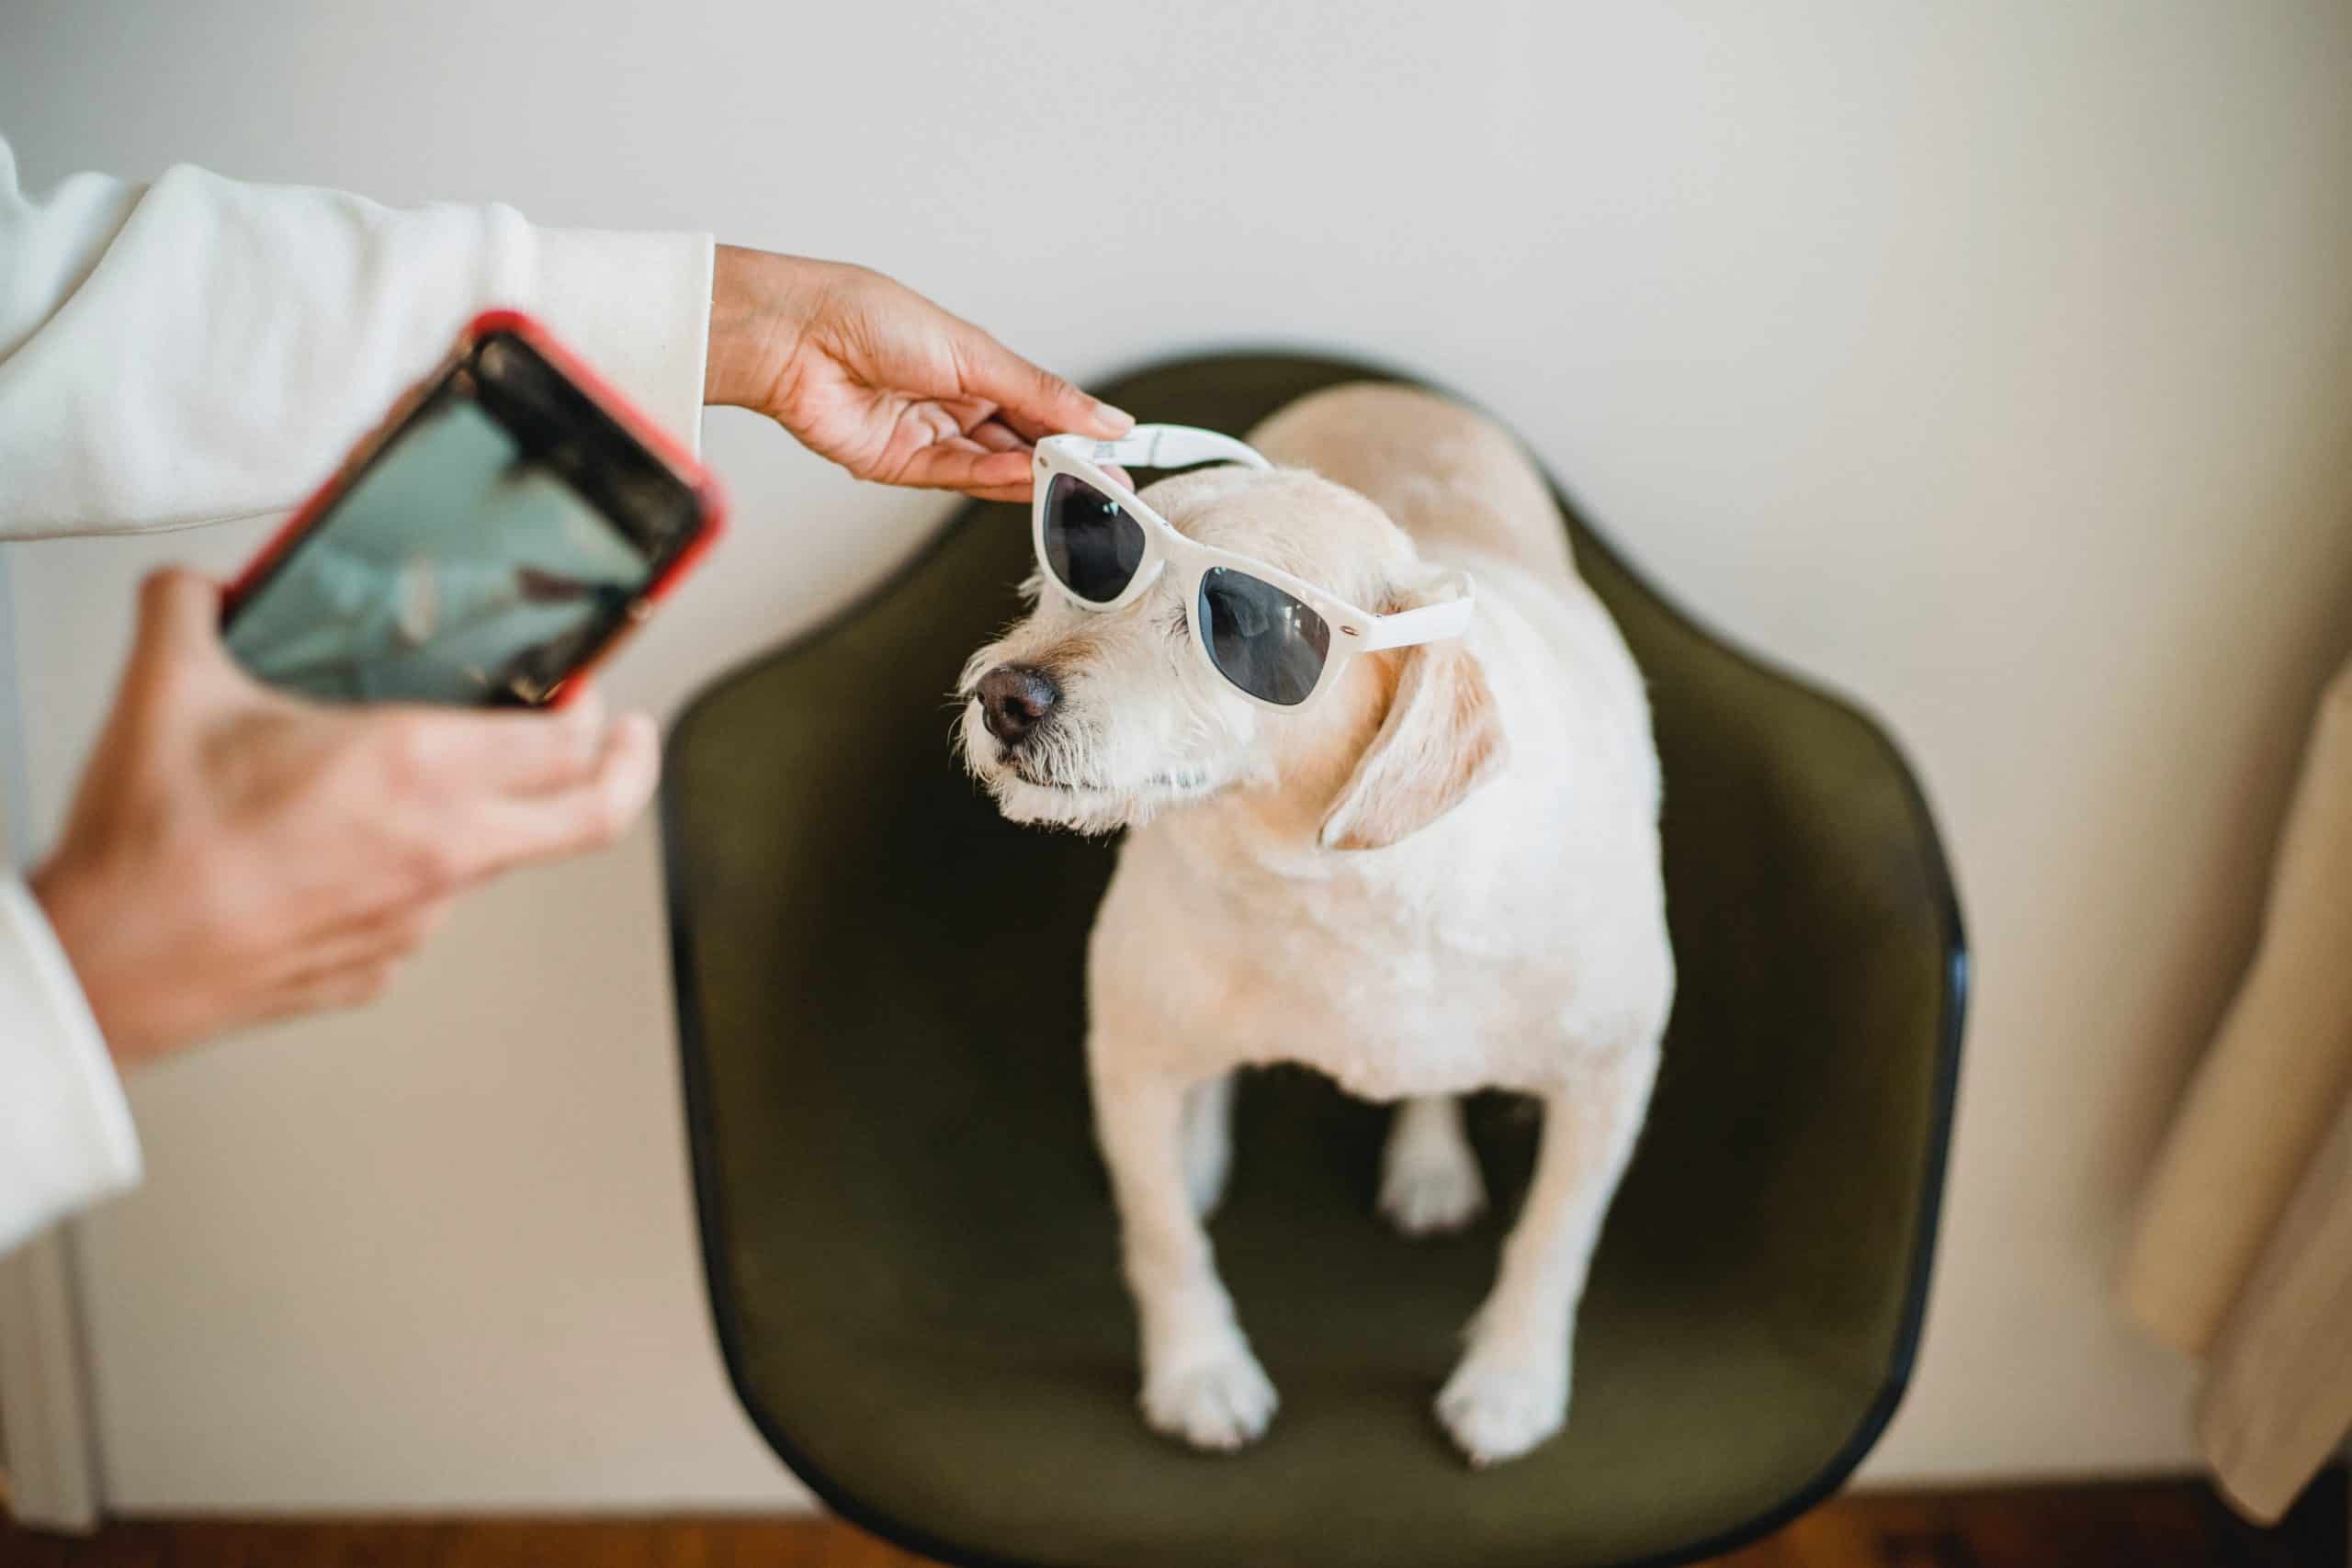 Dog owner takes picture of white dog with sunglasses for Instagram.